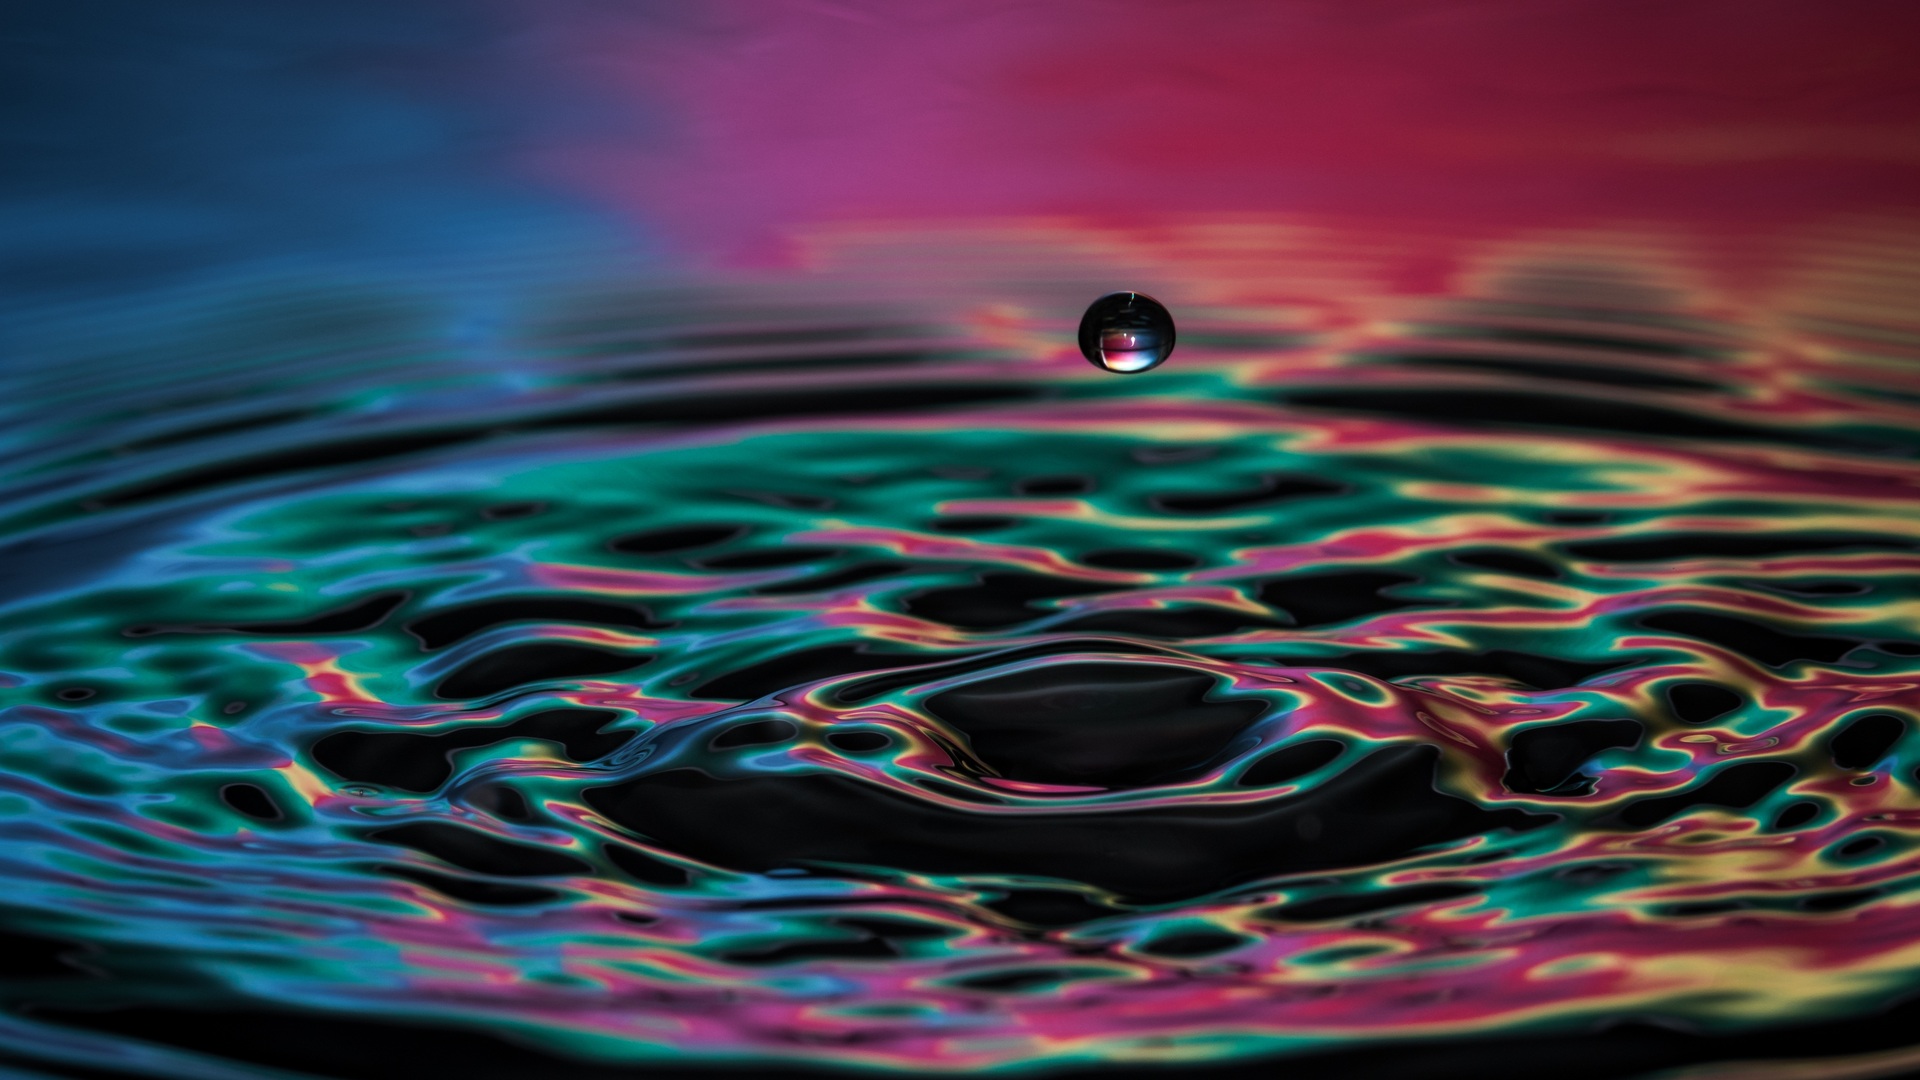 X drop of water laptop full hd p hd k wallpapers images backgrounds photos and pictures